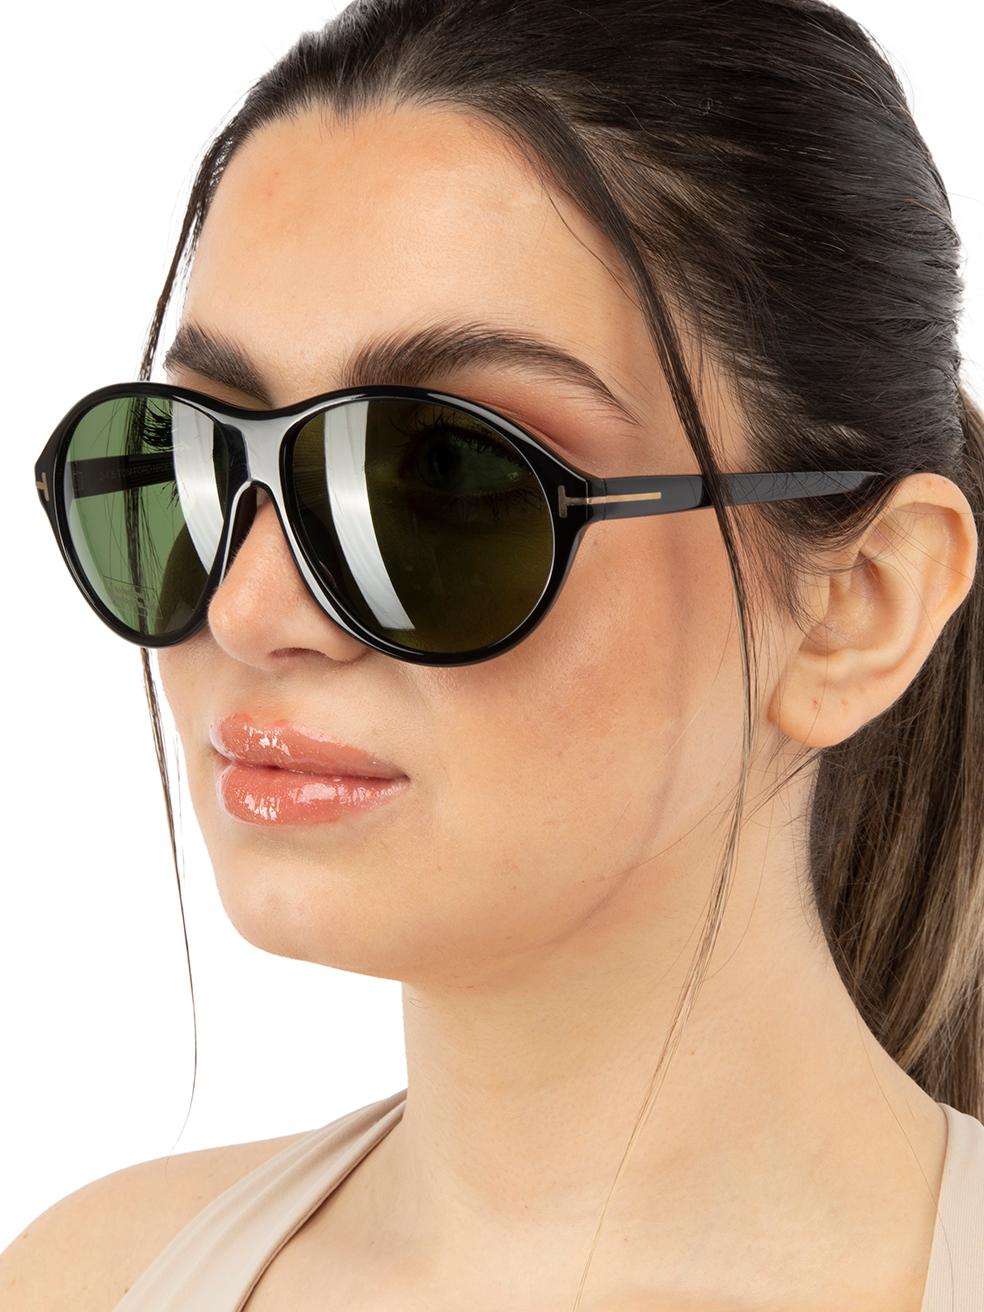 CONDITION is New with tags on this brand new Tom Ford designer item. This item comes with original packaging.
 
 
 
 Details
 
 
 Model: FT0398
 
 Shiny Black
 
 Acetate
 
 Round Sunglasses
 
 Green Lens
 
 Full-Rim
 
 100% UV protection
 
 
 
 
 
